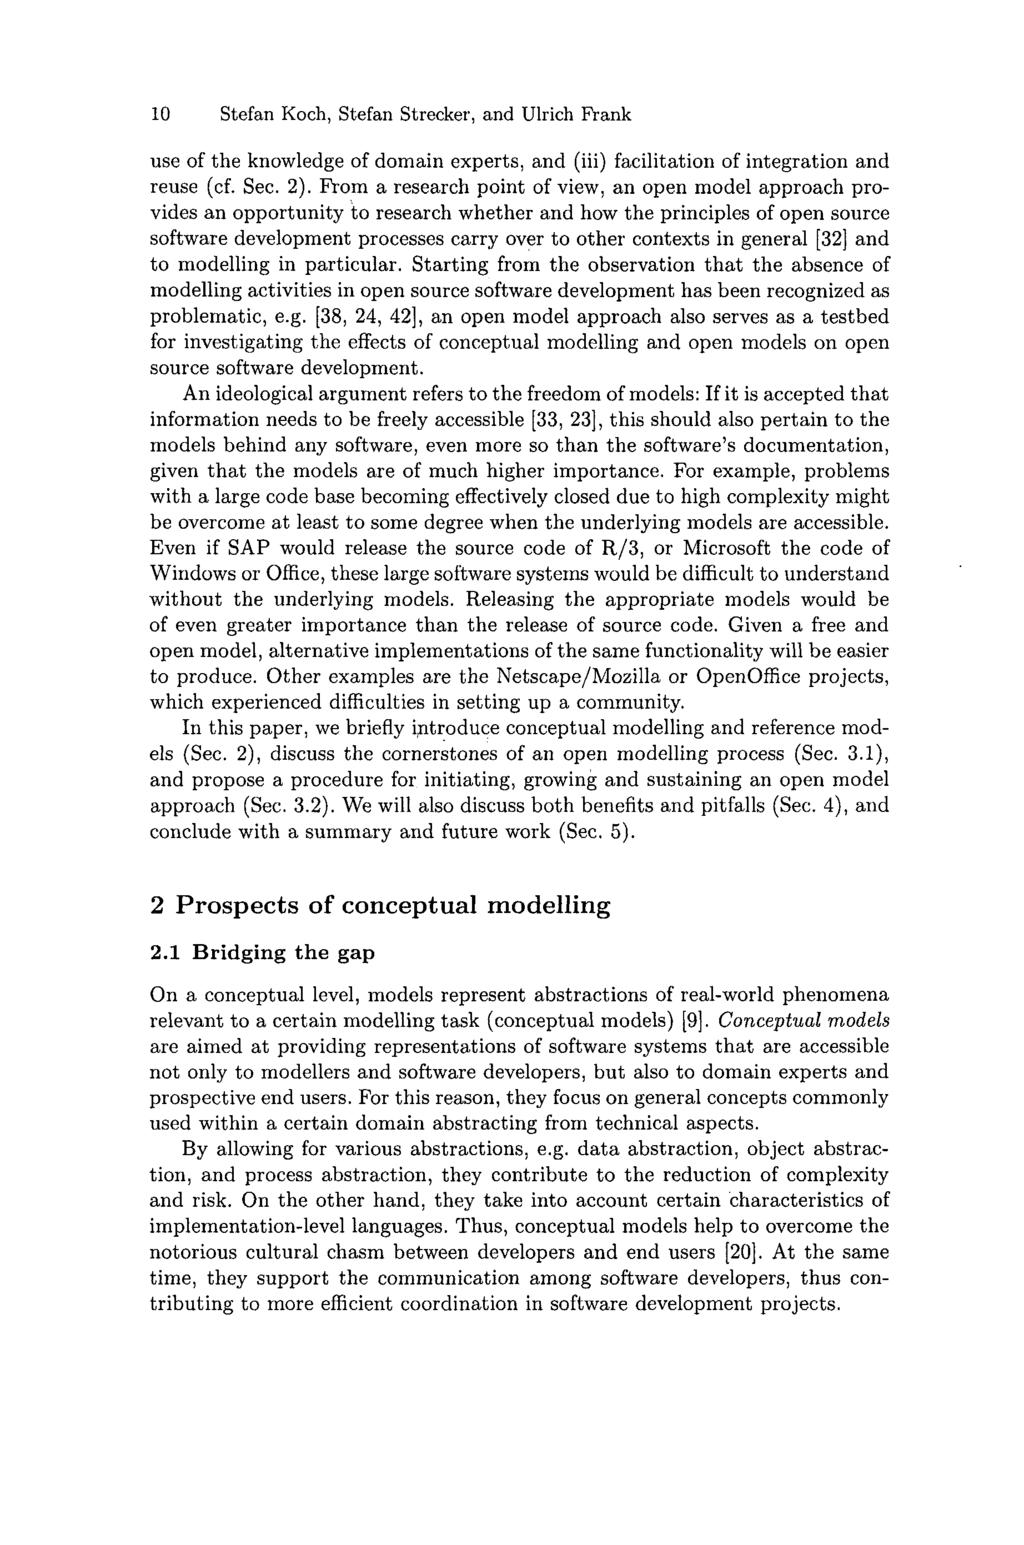 10 Stefan Koch, Stefan Strecker, and Ulrich Prank use of the knowledge of domain experts, and (iii) facihtation of integration and reuse (cf. Sec. 2).